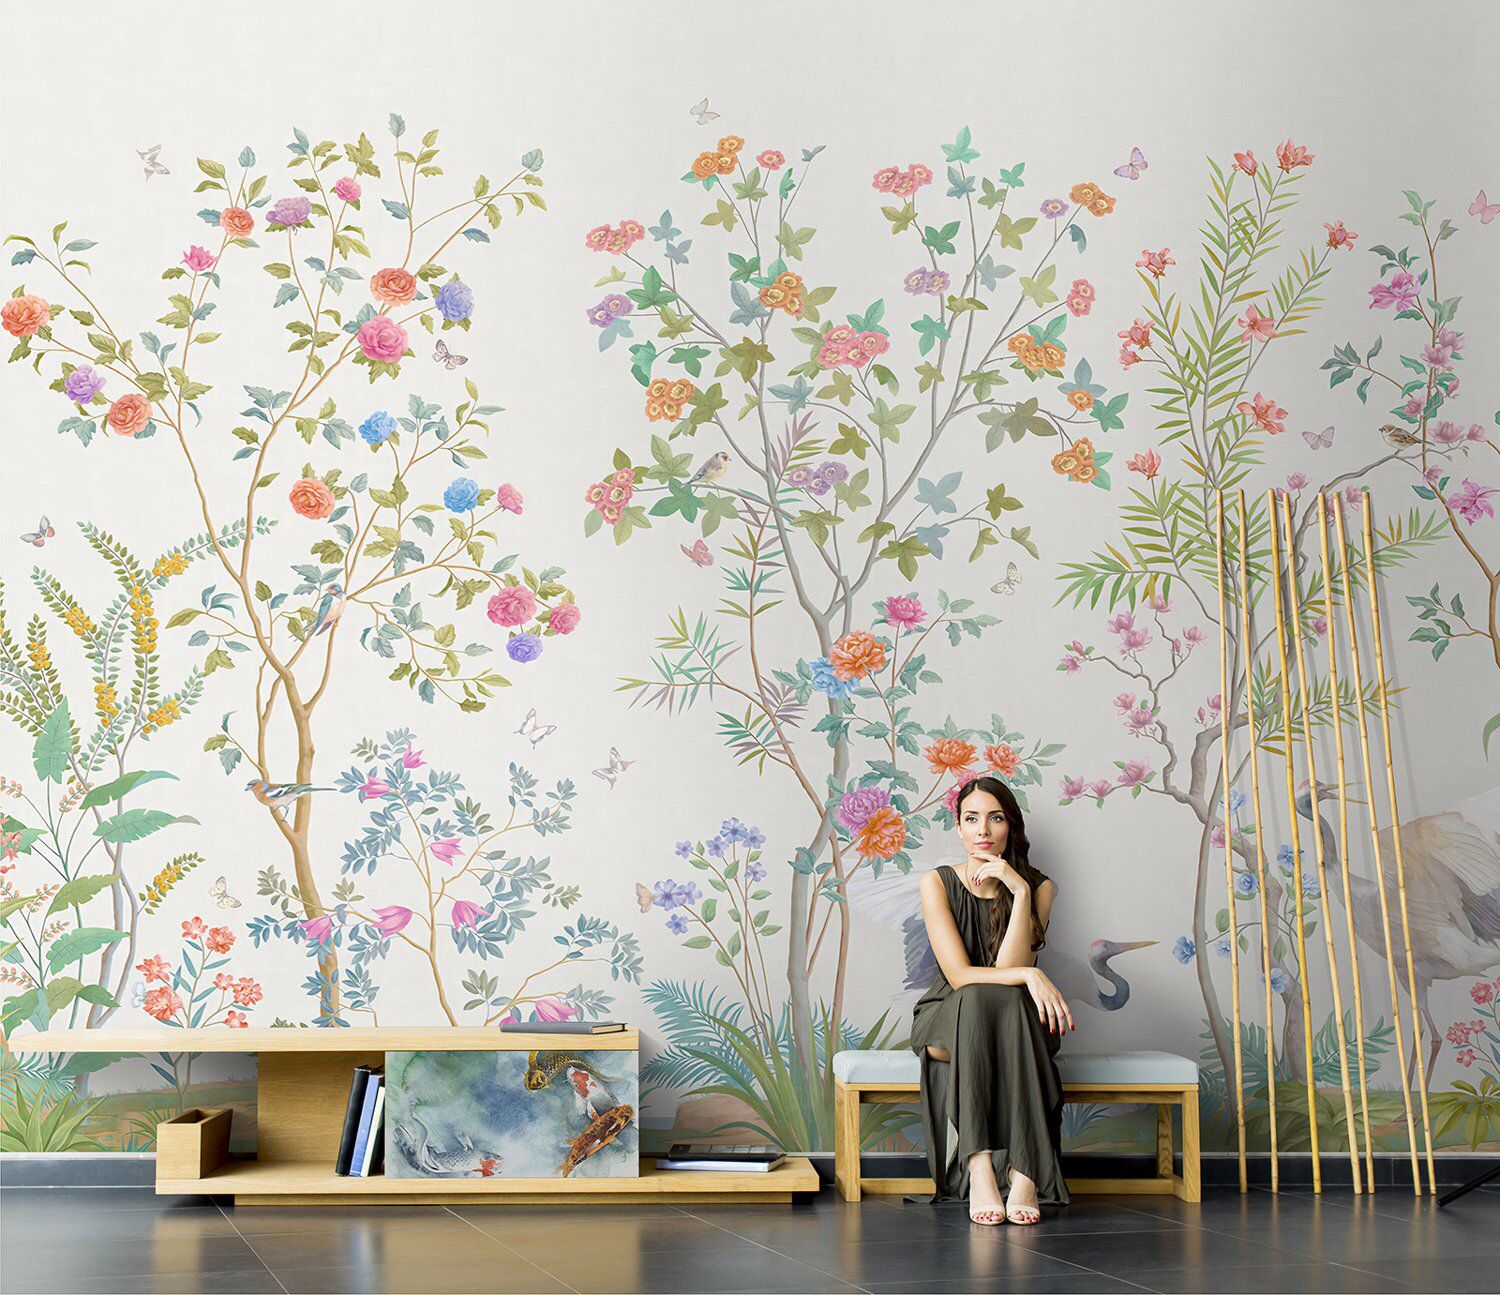 Details more than 54 chinoiserie wallpaper mural best - in.cdgdbentre